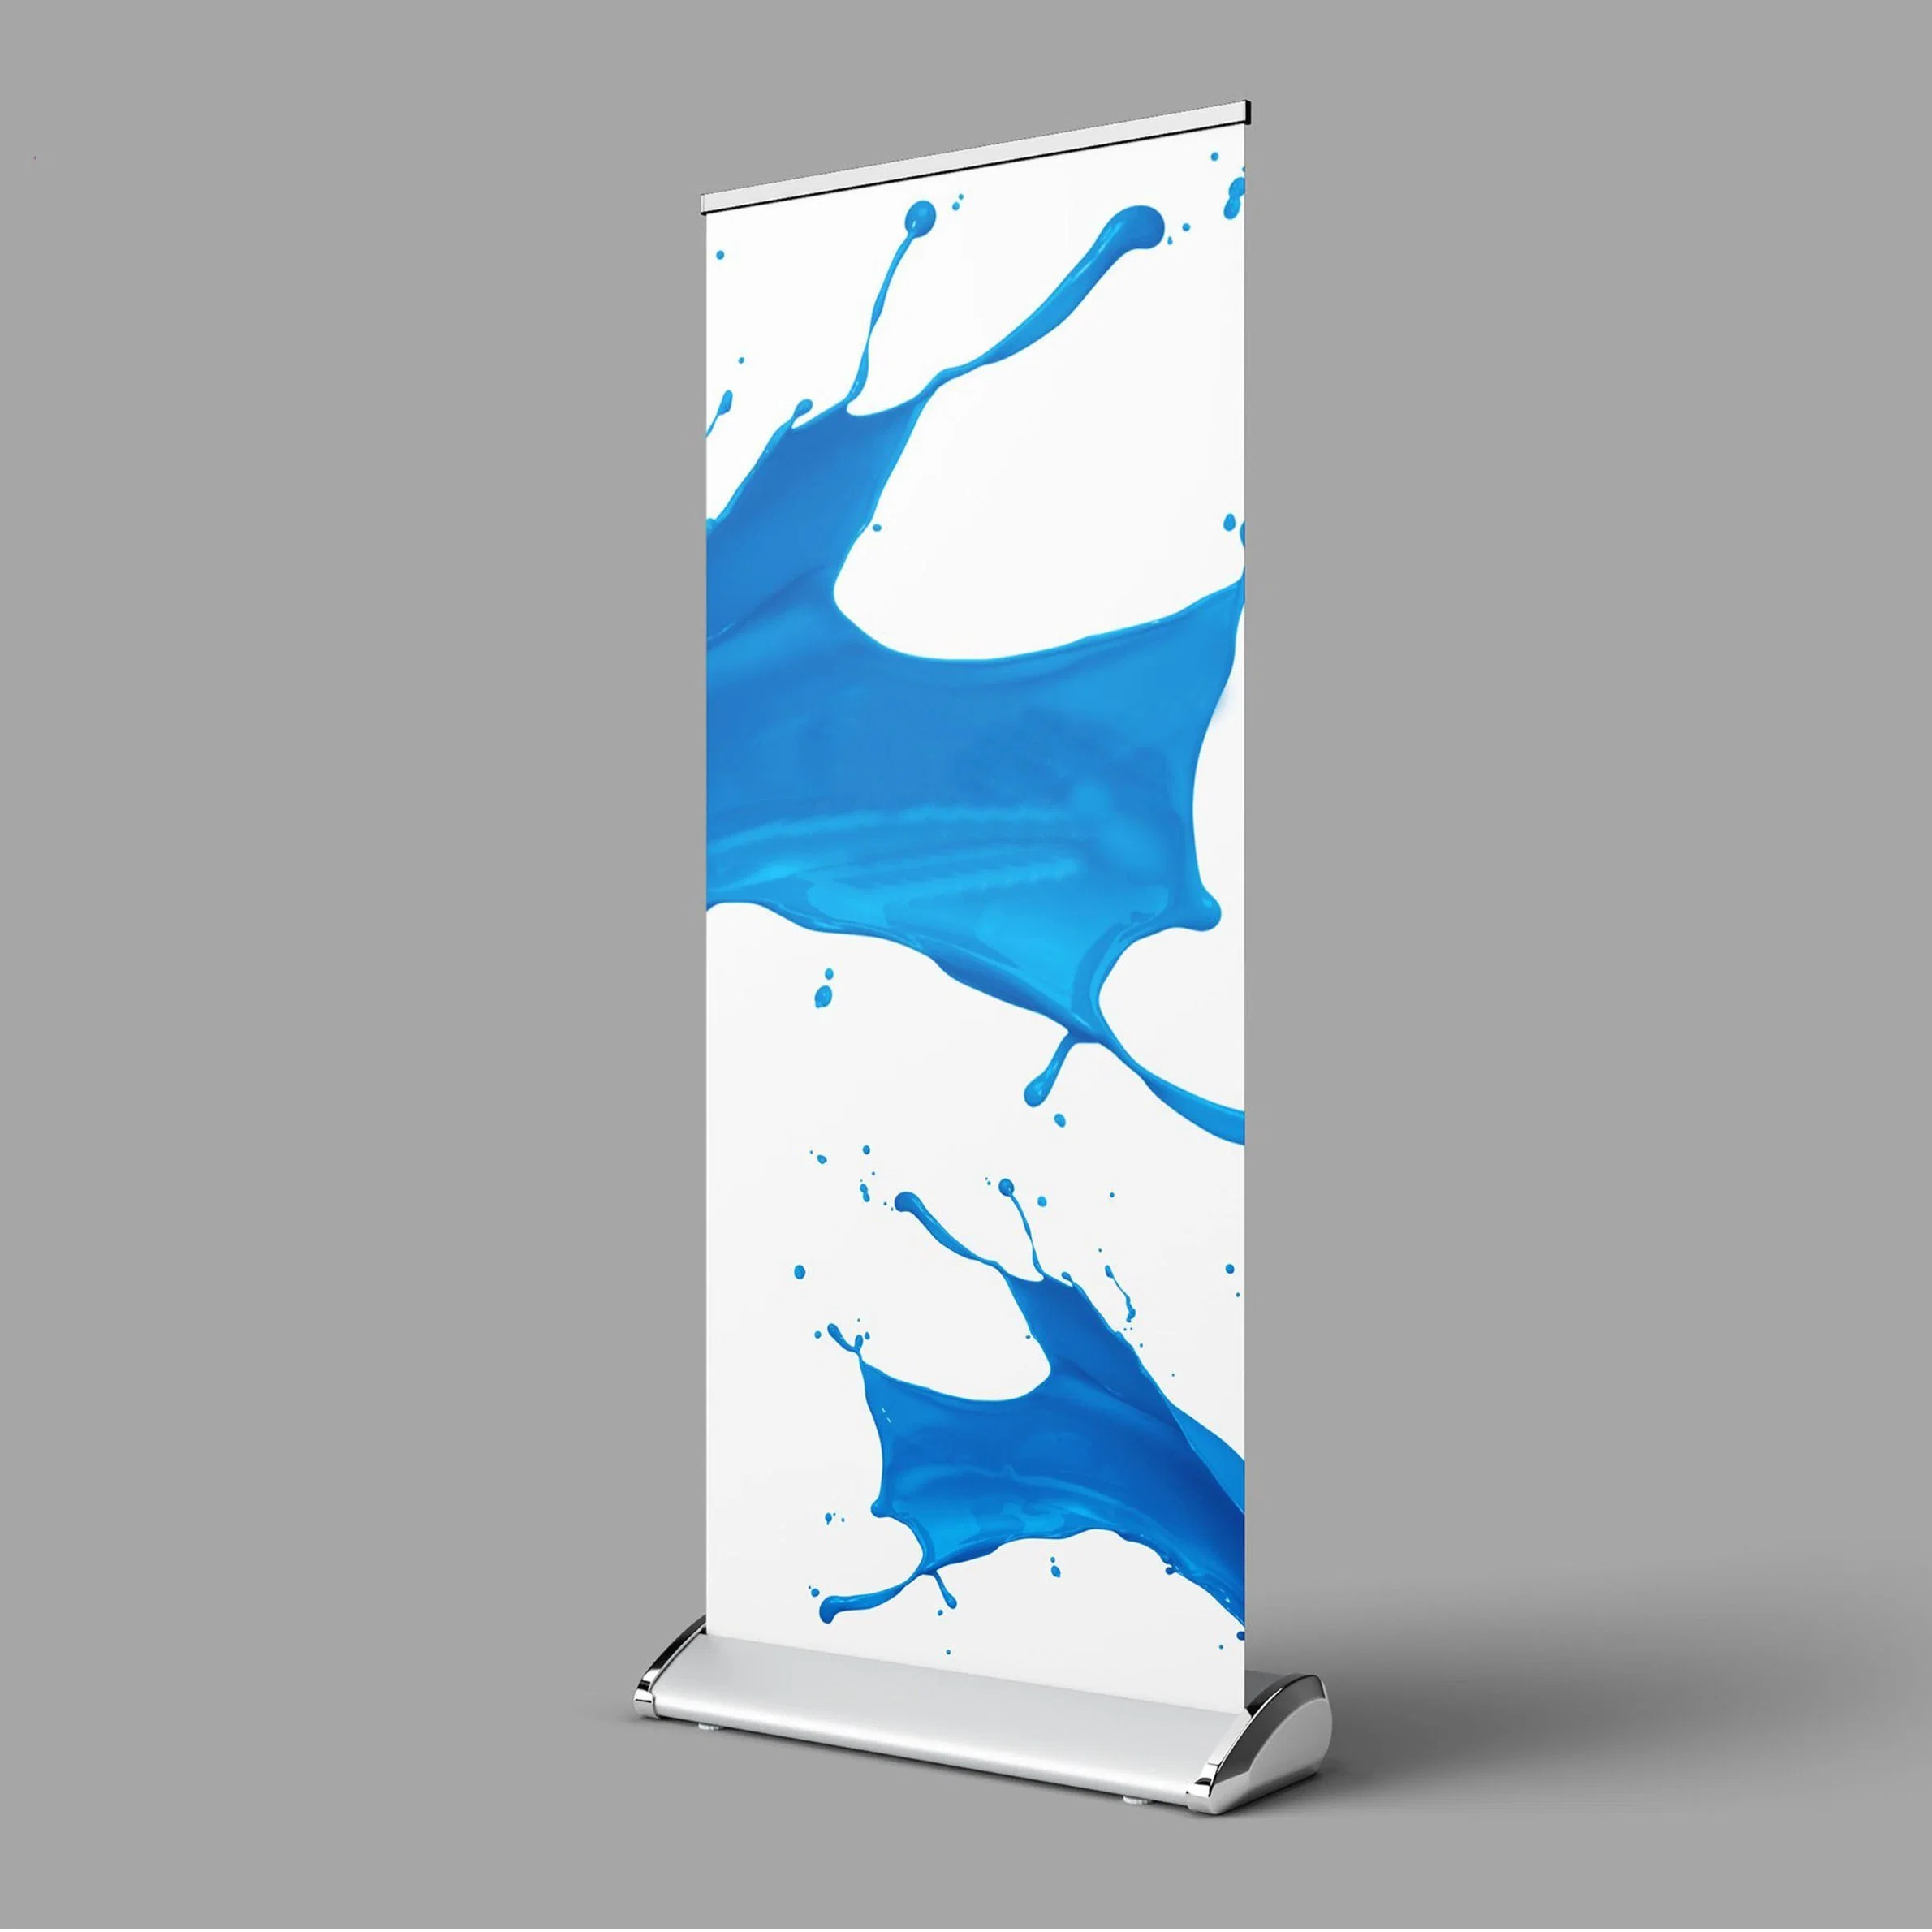 Promotion Display Pop up Roll up Banner Display Roll up Custom Roll up Banners Retractable Banner Stand Roll up Trade Show Display Stand Custom Banners